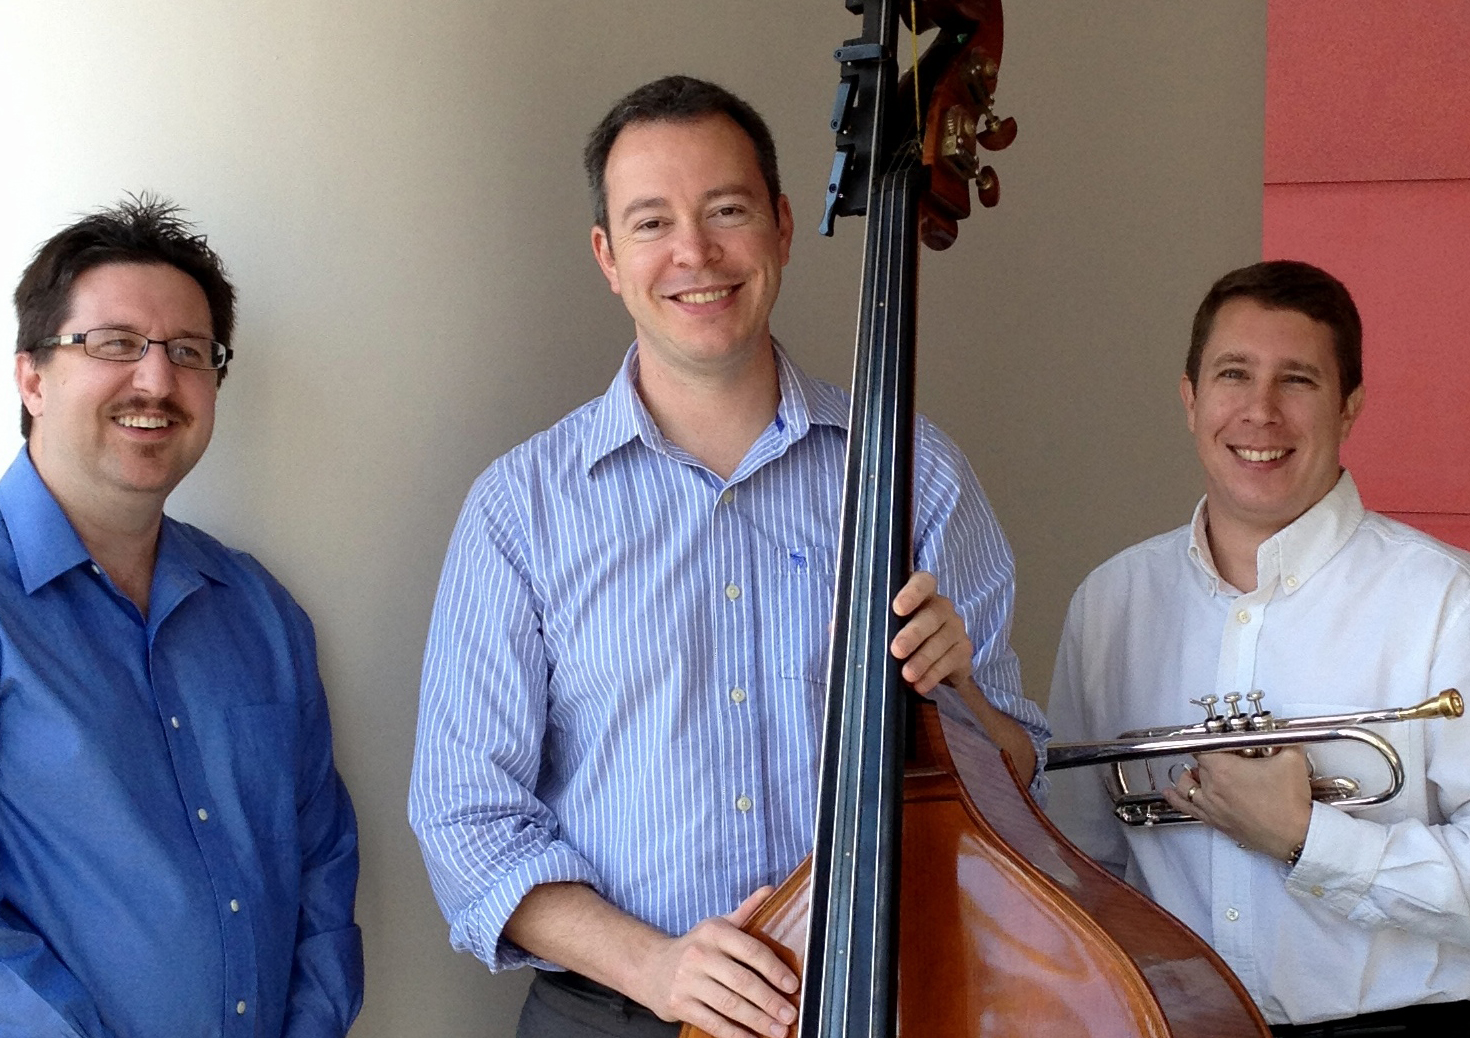 Faculty soloists and new music in the spotlight for concert